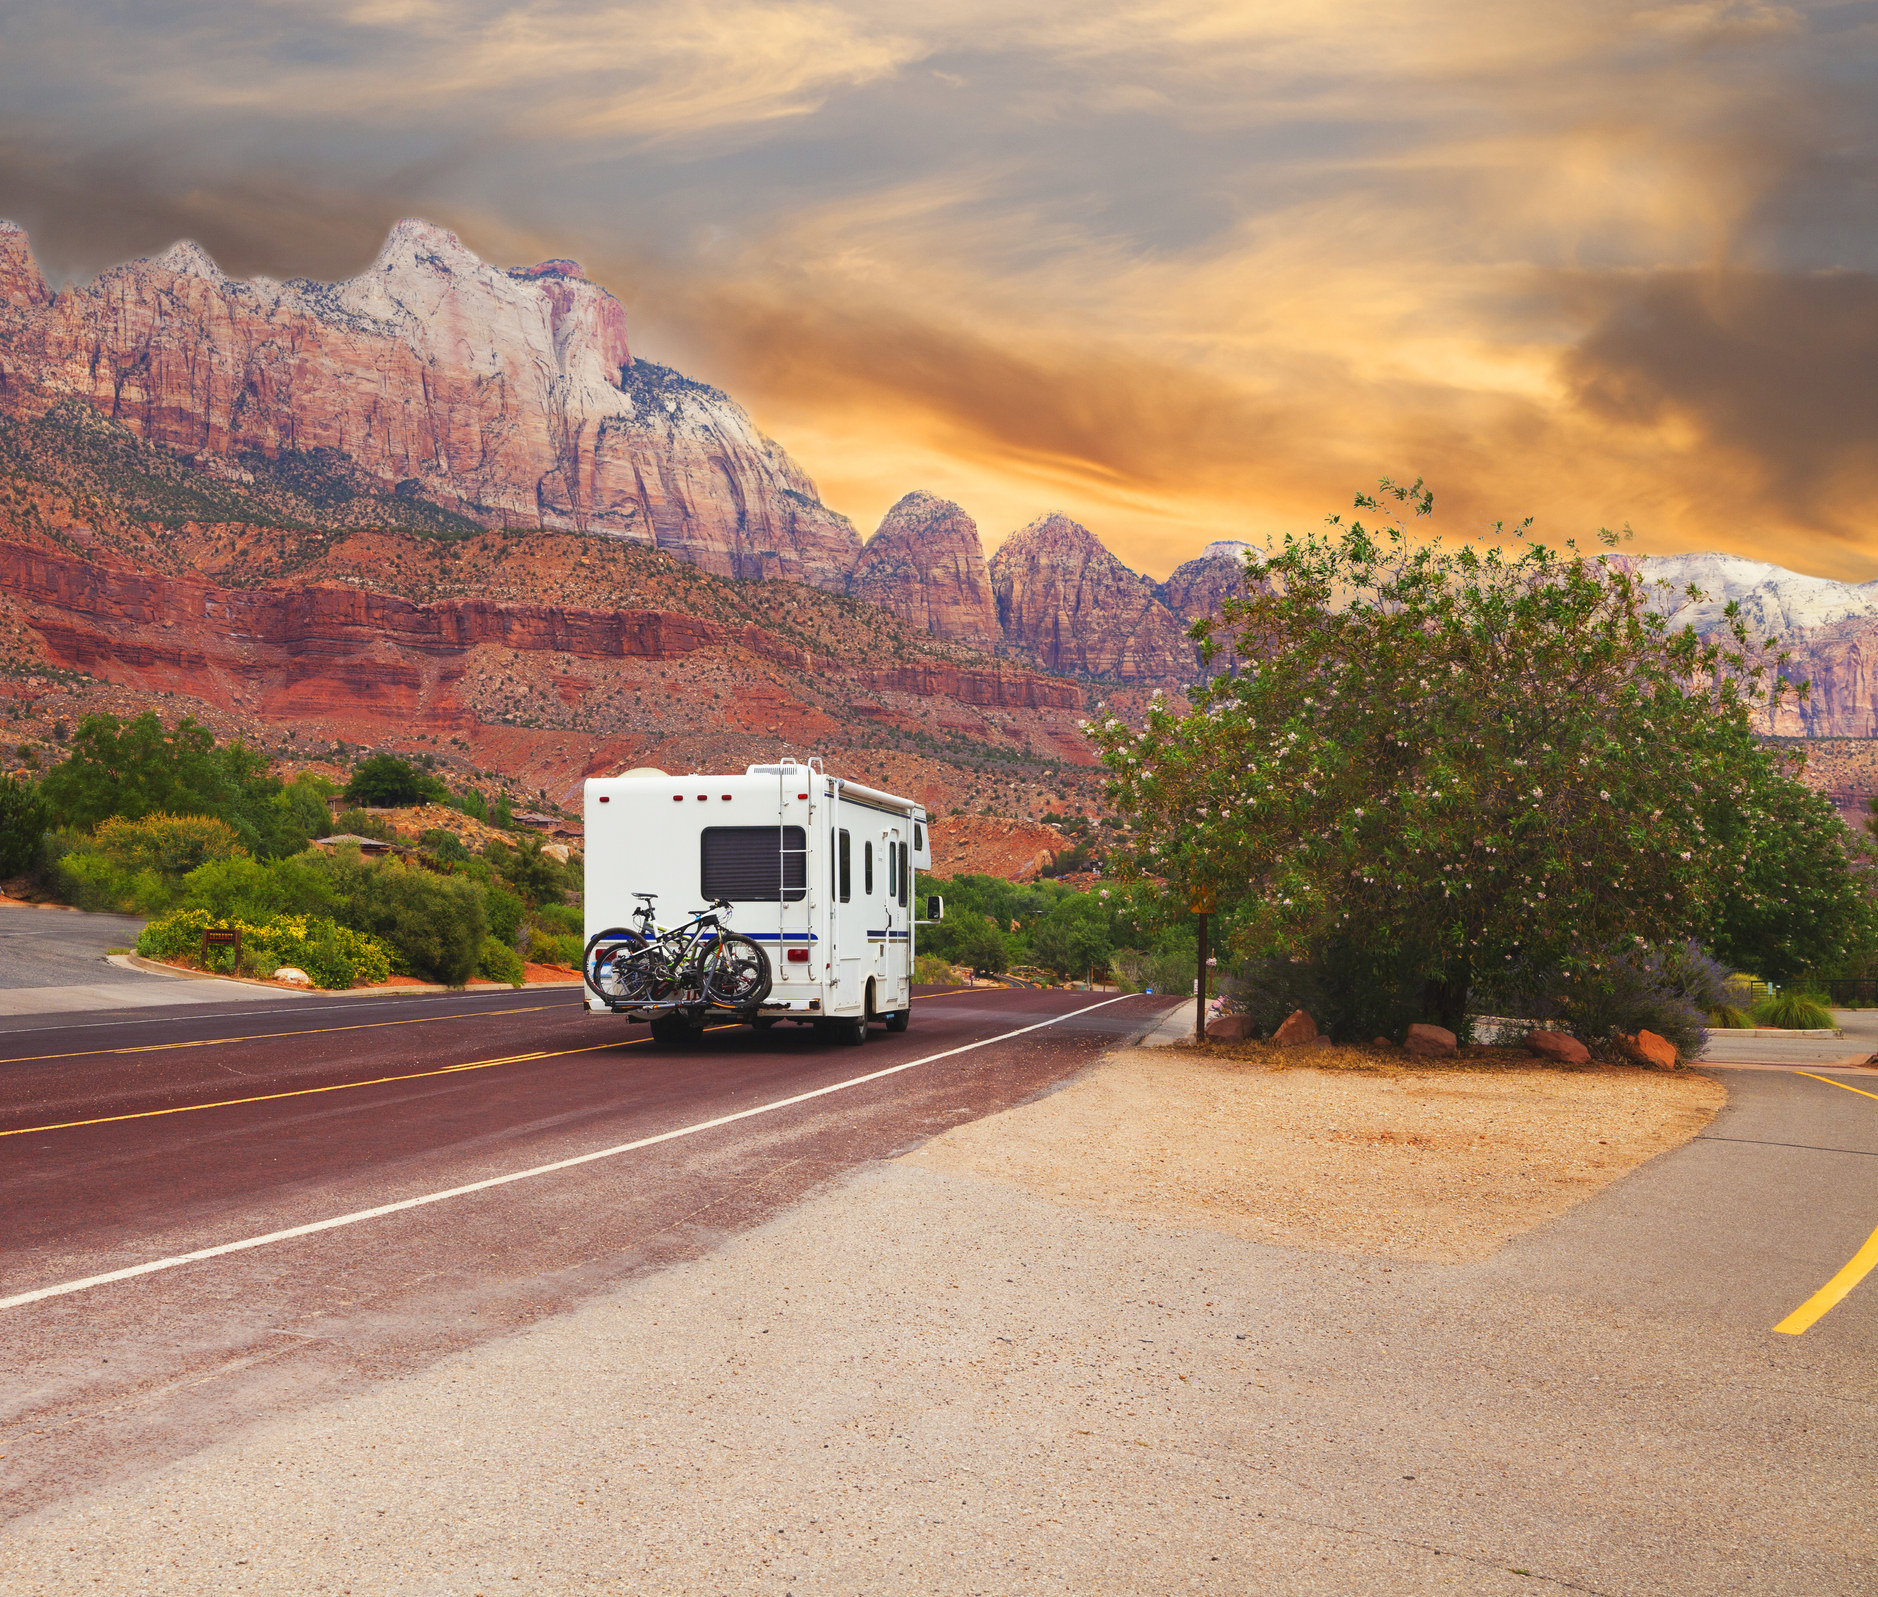 A motor home on the road toward Zion National Park.